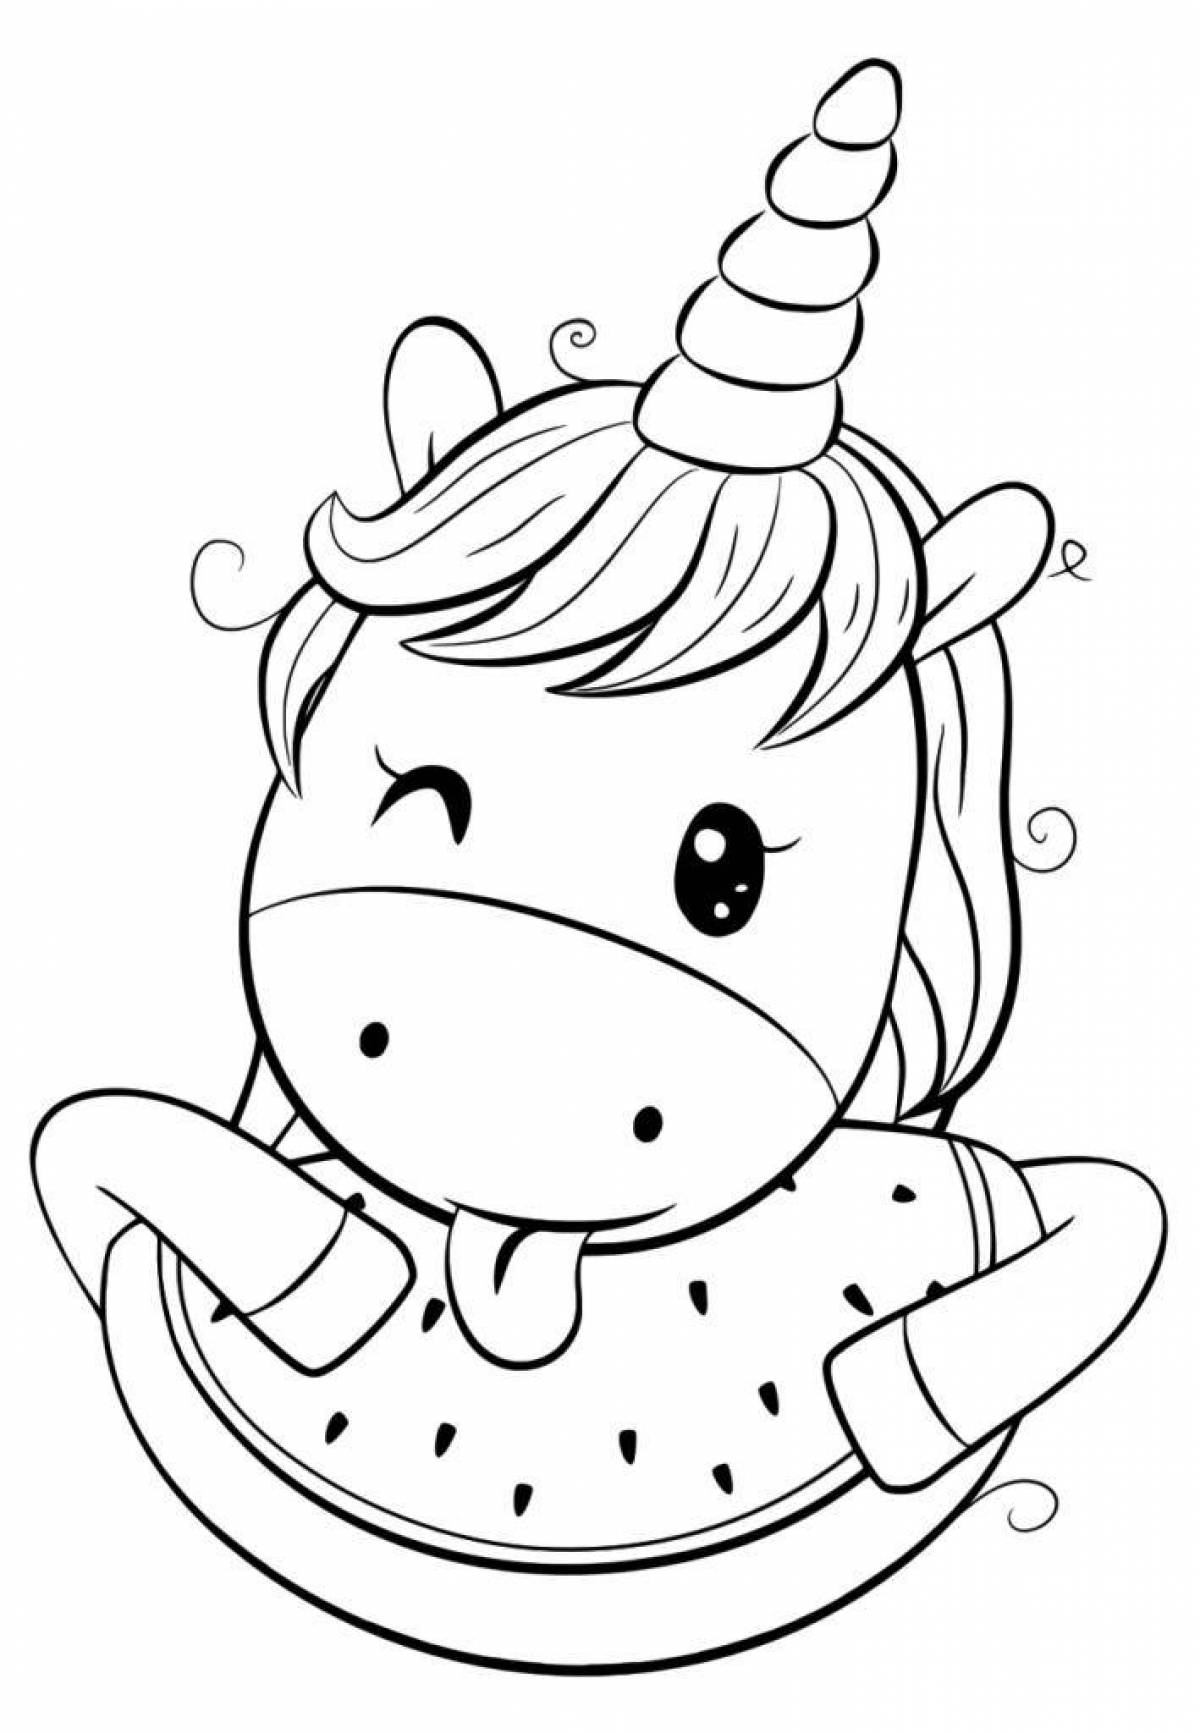 Sparkling coloring book for girls 6 years old unicorn